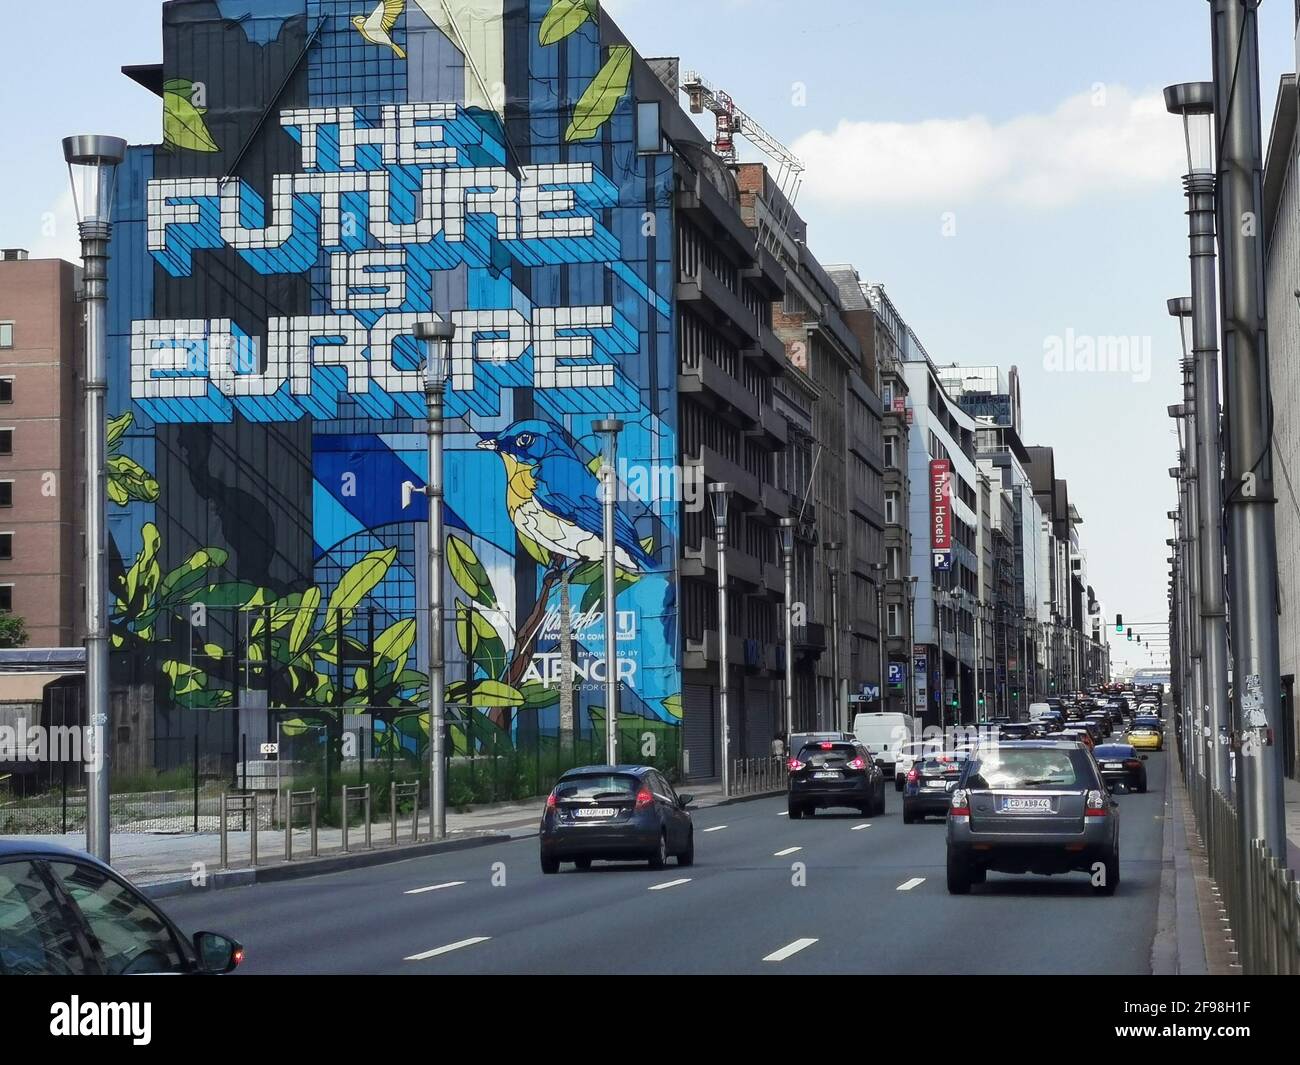 Main car thoroughfare in Brussels with facade 'The Future is Europe' Stock Photo